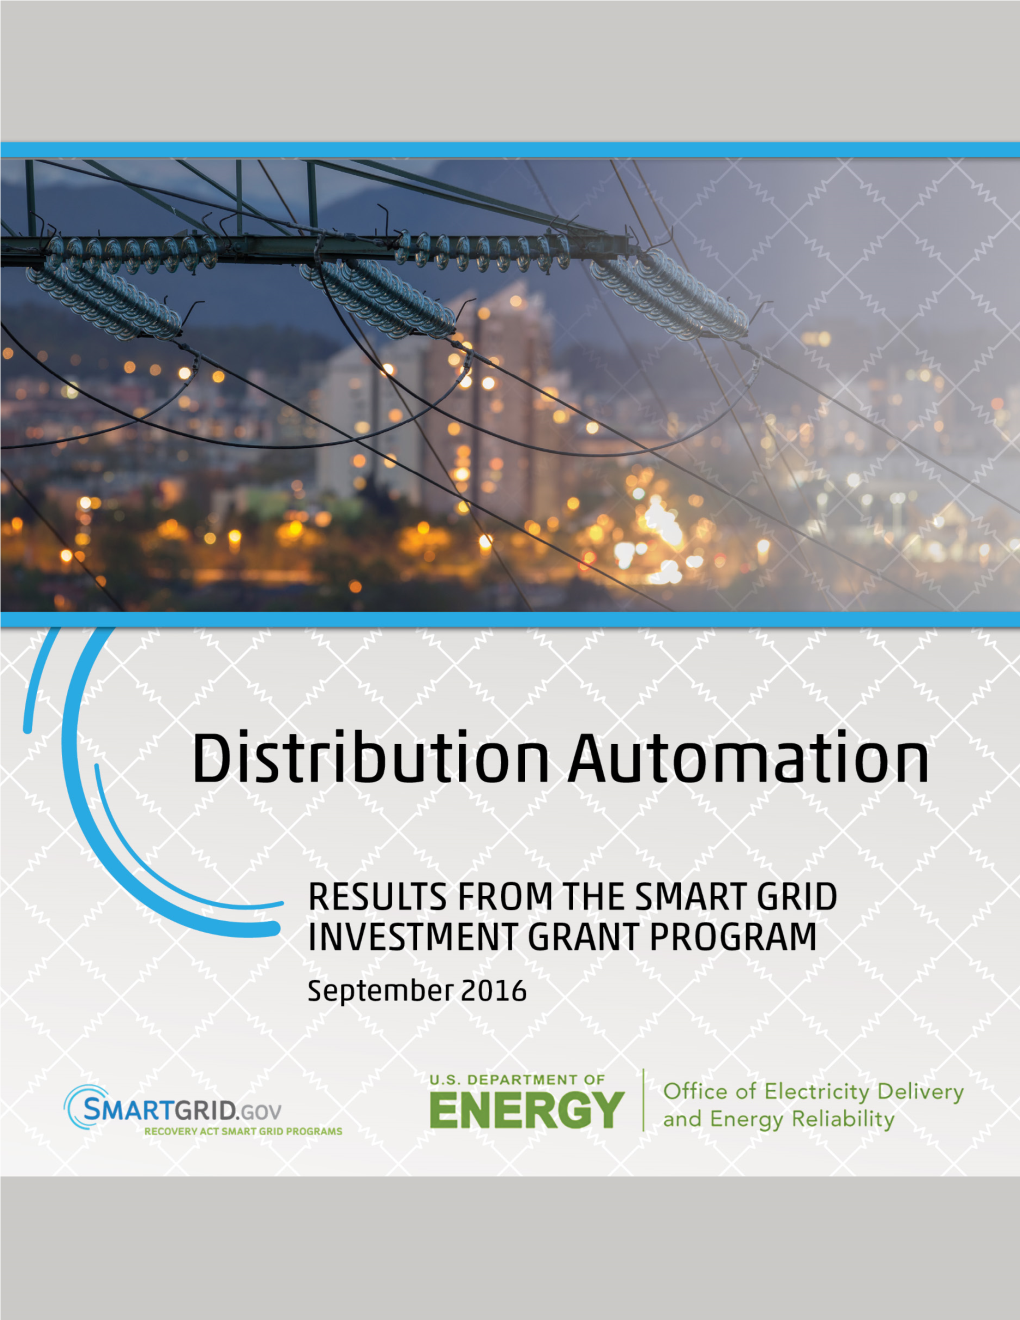 Distribution Automation: Results from the Smart Grid Investment Grant